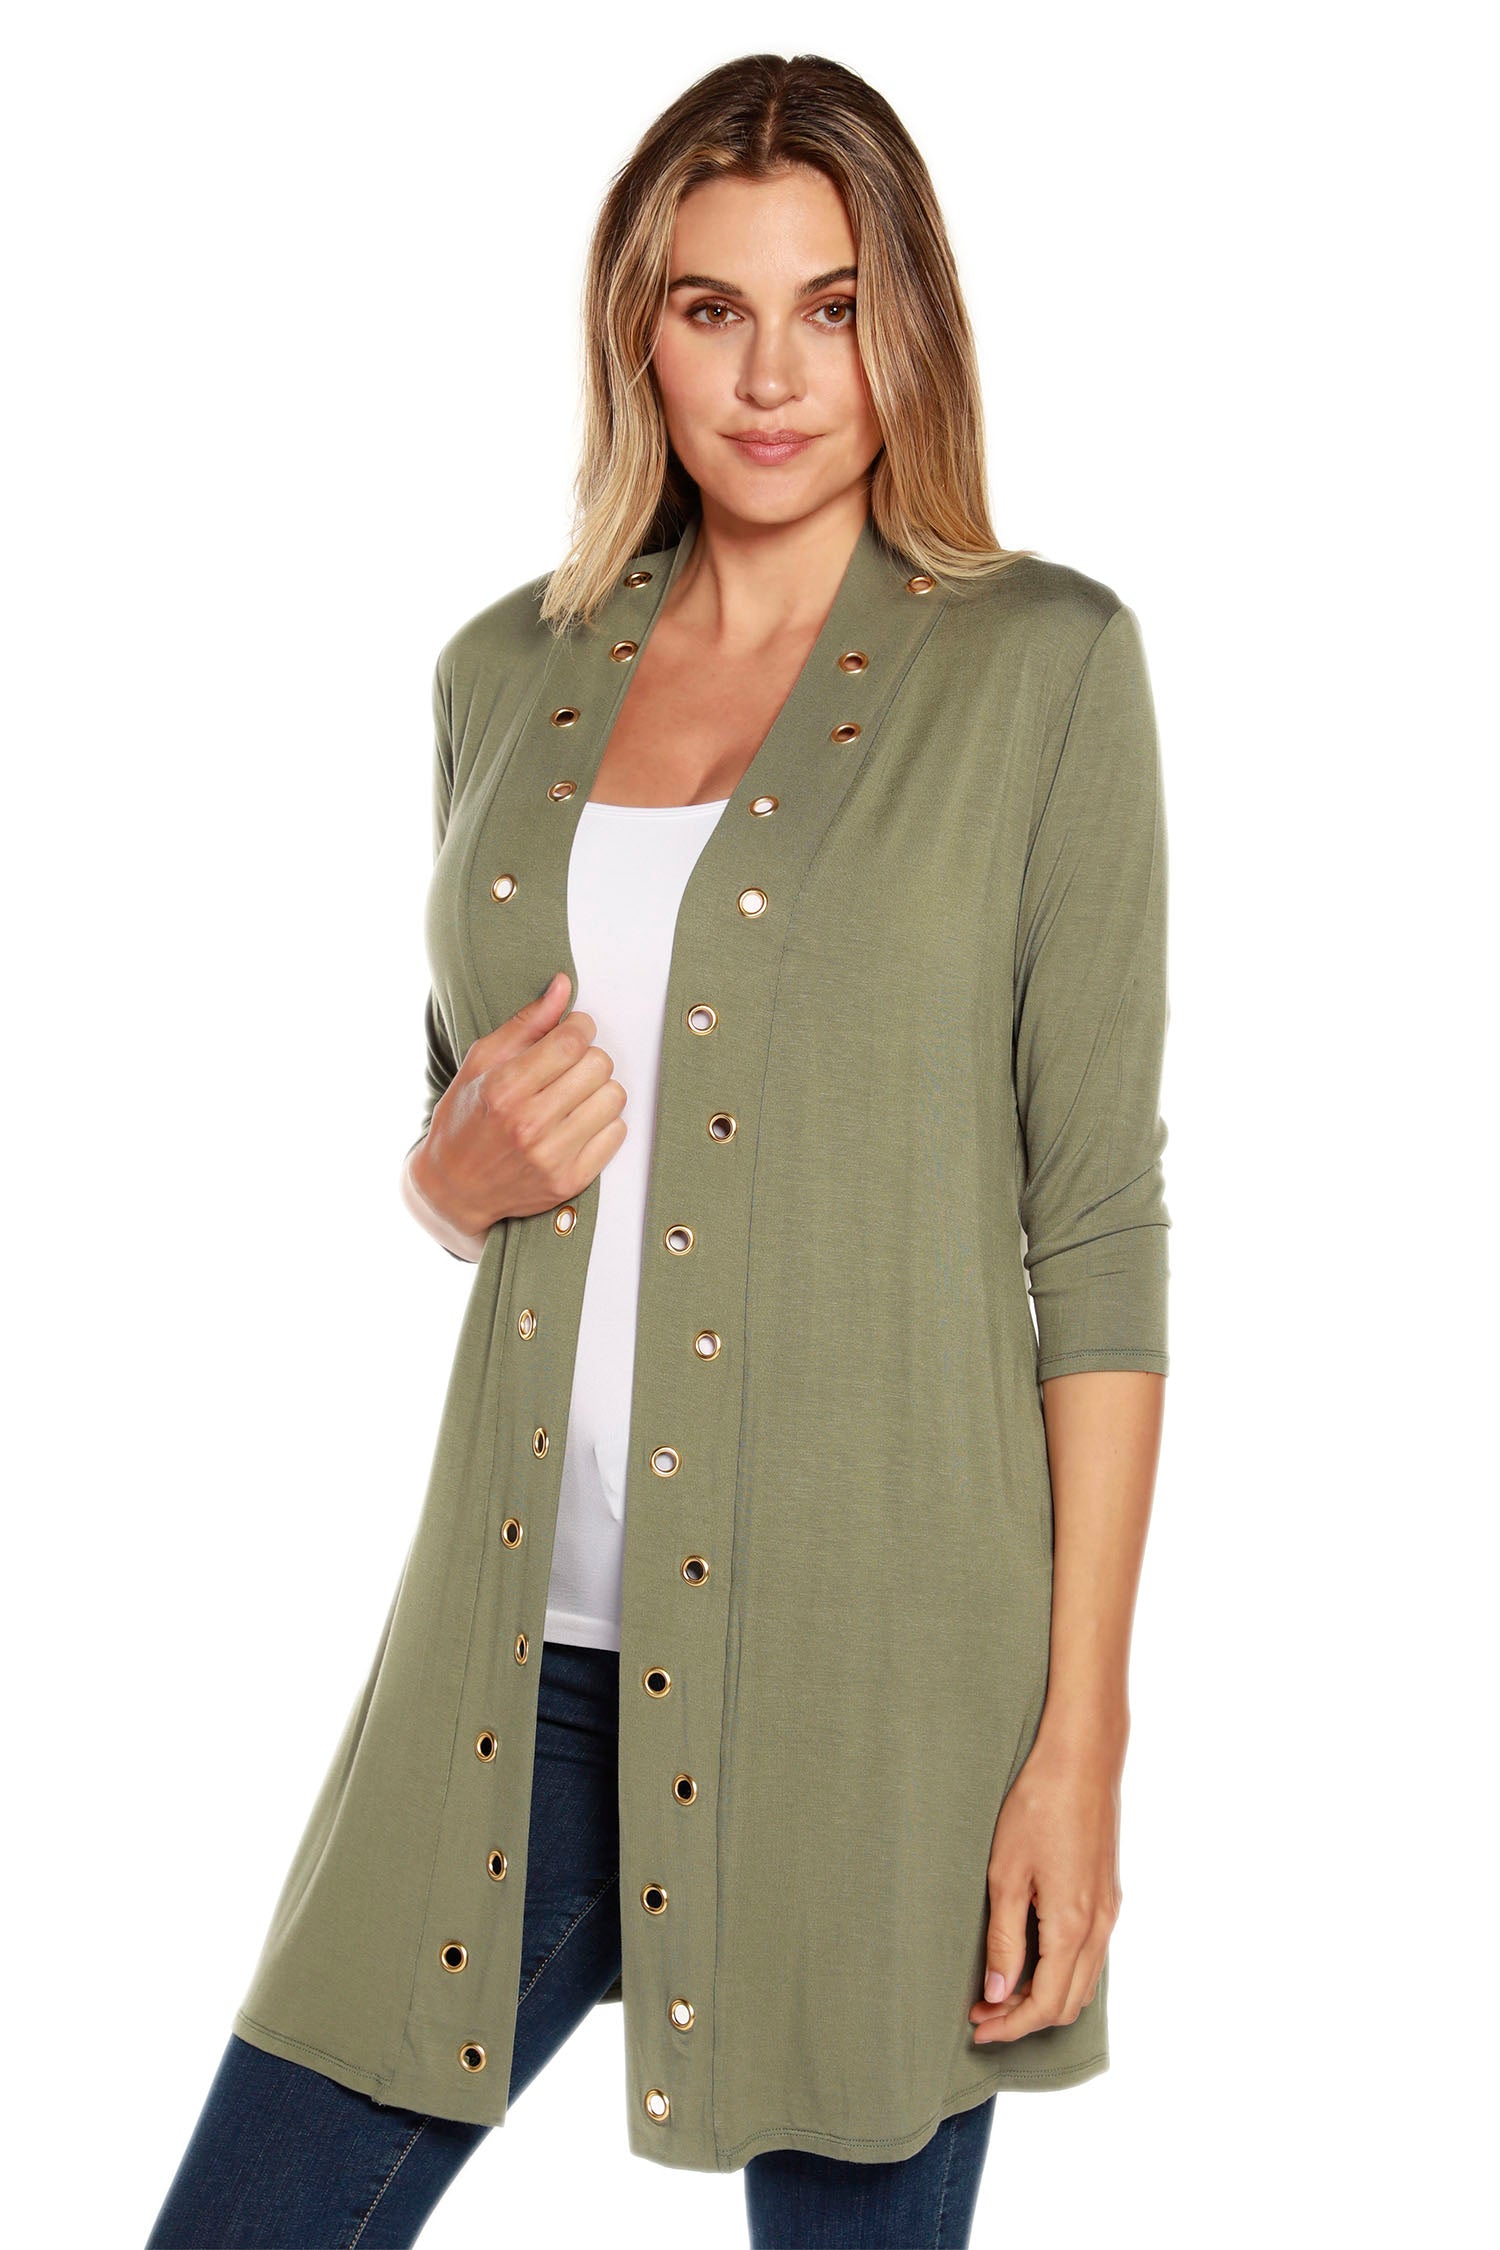 Women's 3/4 Sleeve Mid-Thigh Jersey Cardigan with Gold Grommet Trim